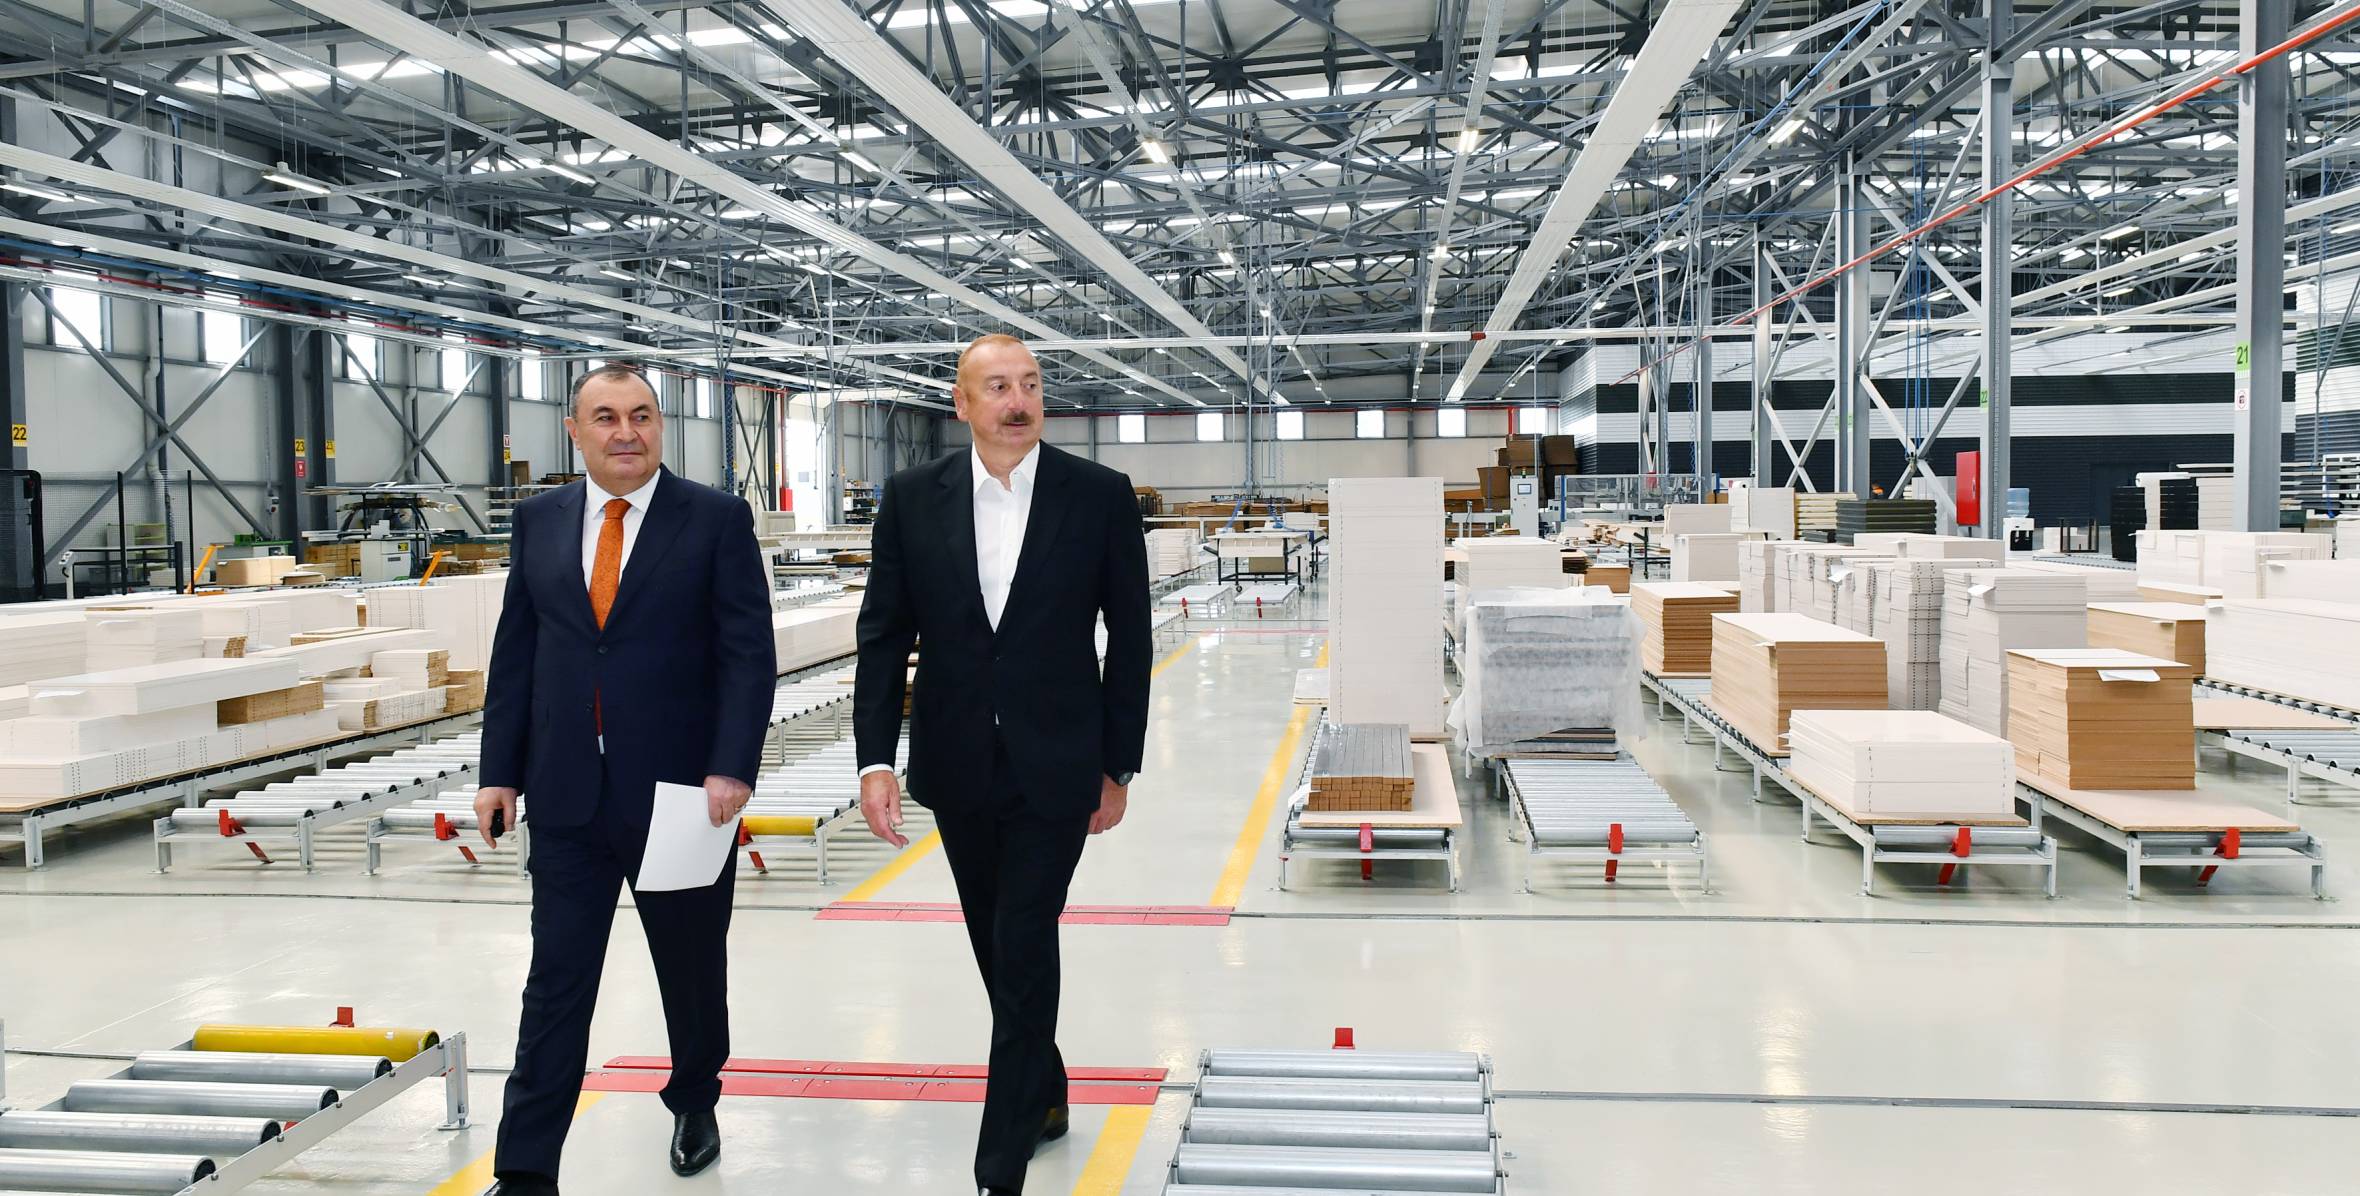 Ilham Aliyev attended the inauguration of “Venzana” furniture factory in Gazakh